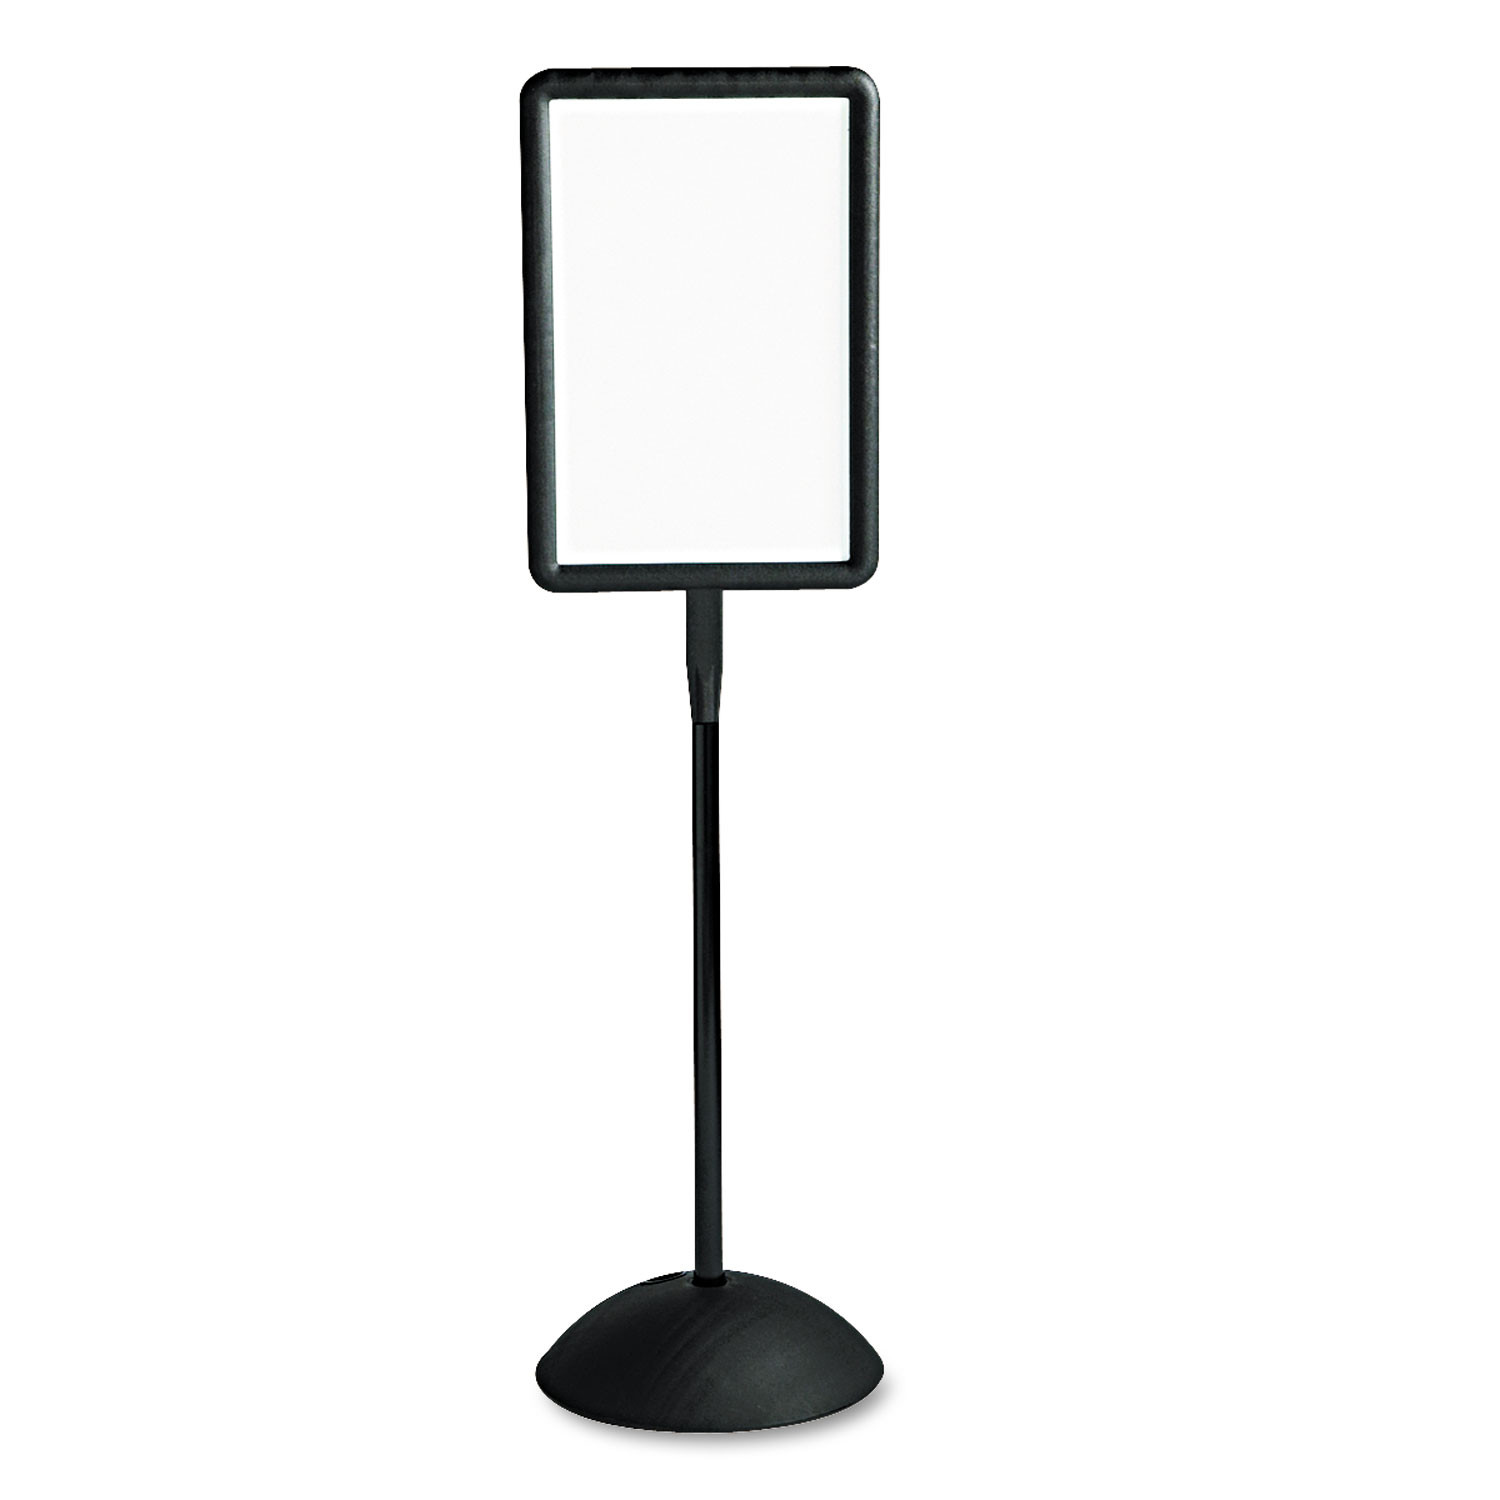 Lorell Magnetic Whiteboard Easel 